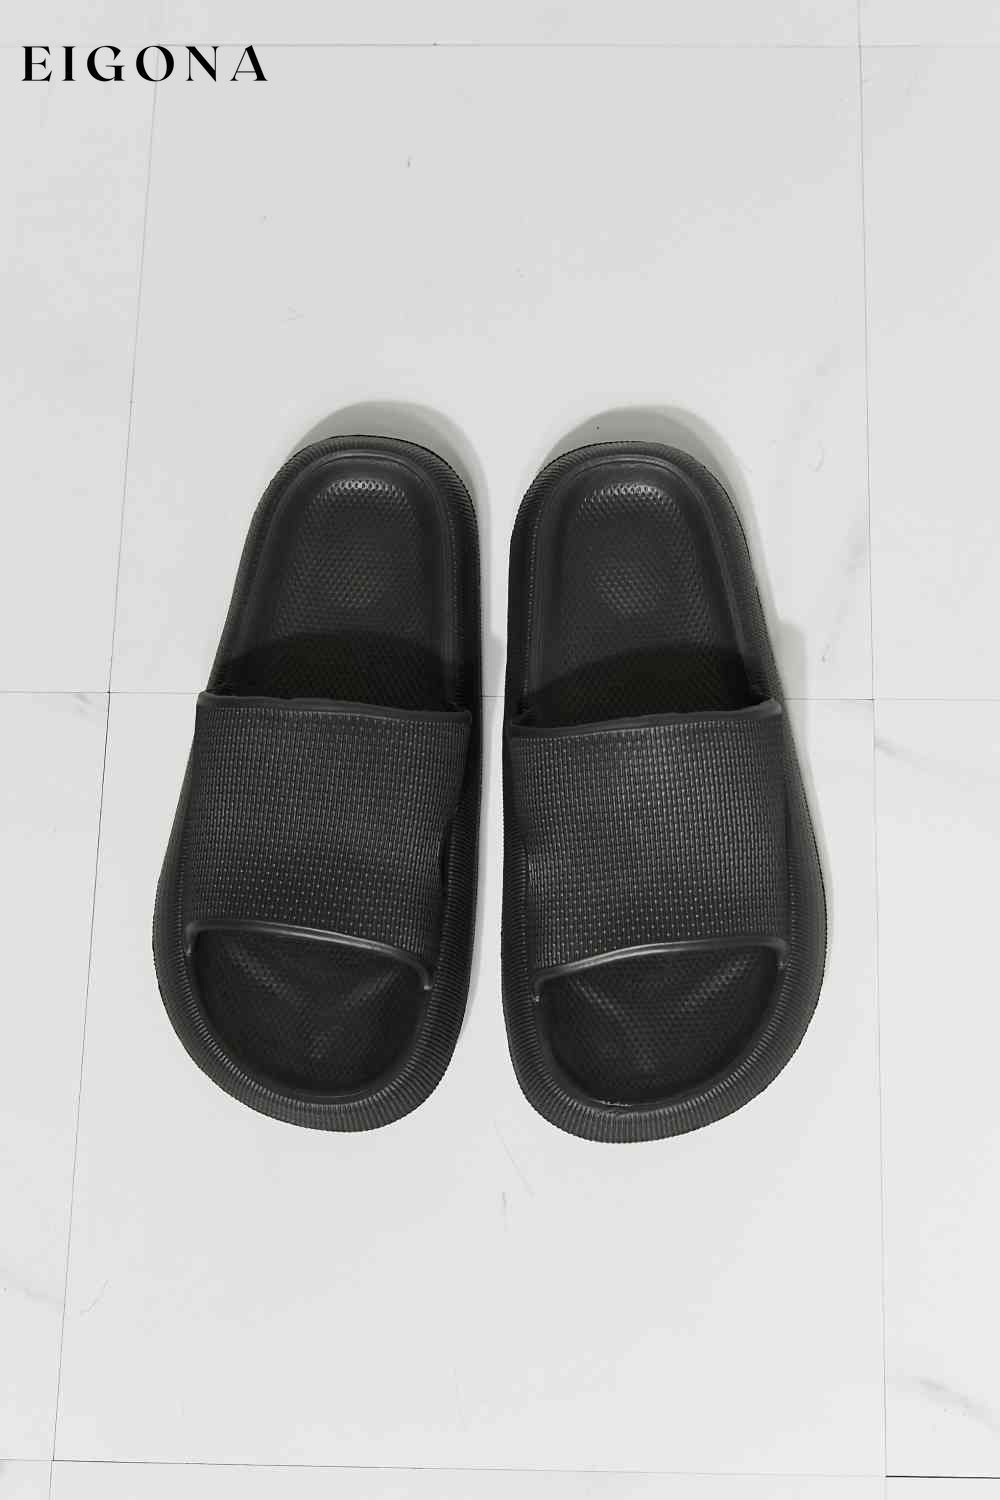 Arms Around Me Open Toe Slide in Black Melody Ship from USA shoes womens shoes